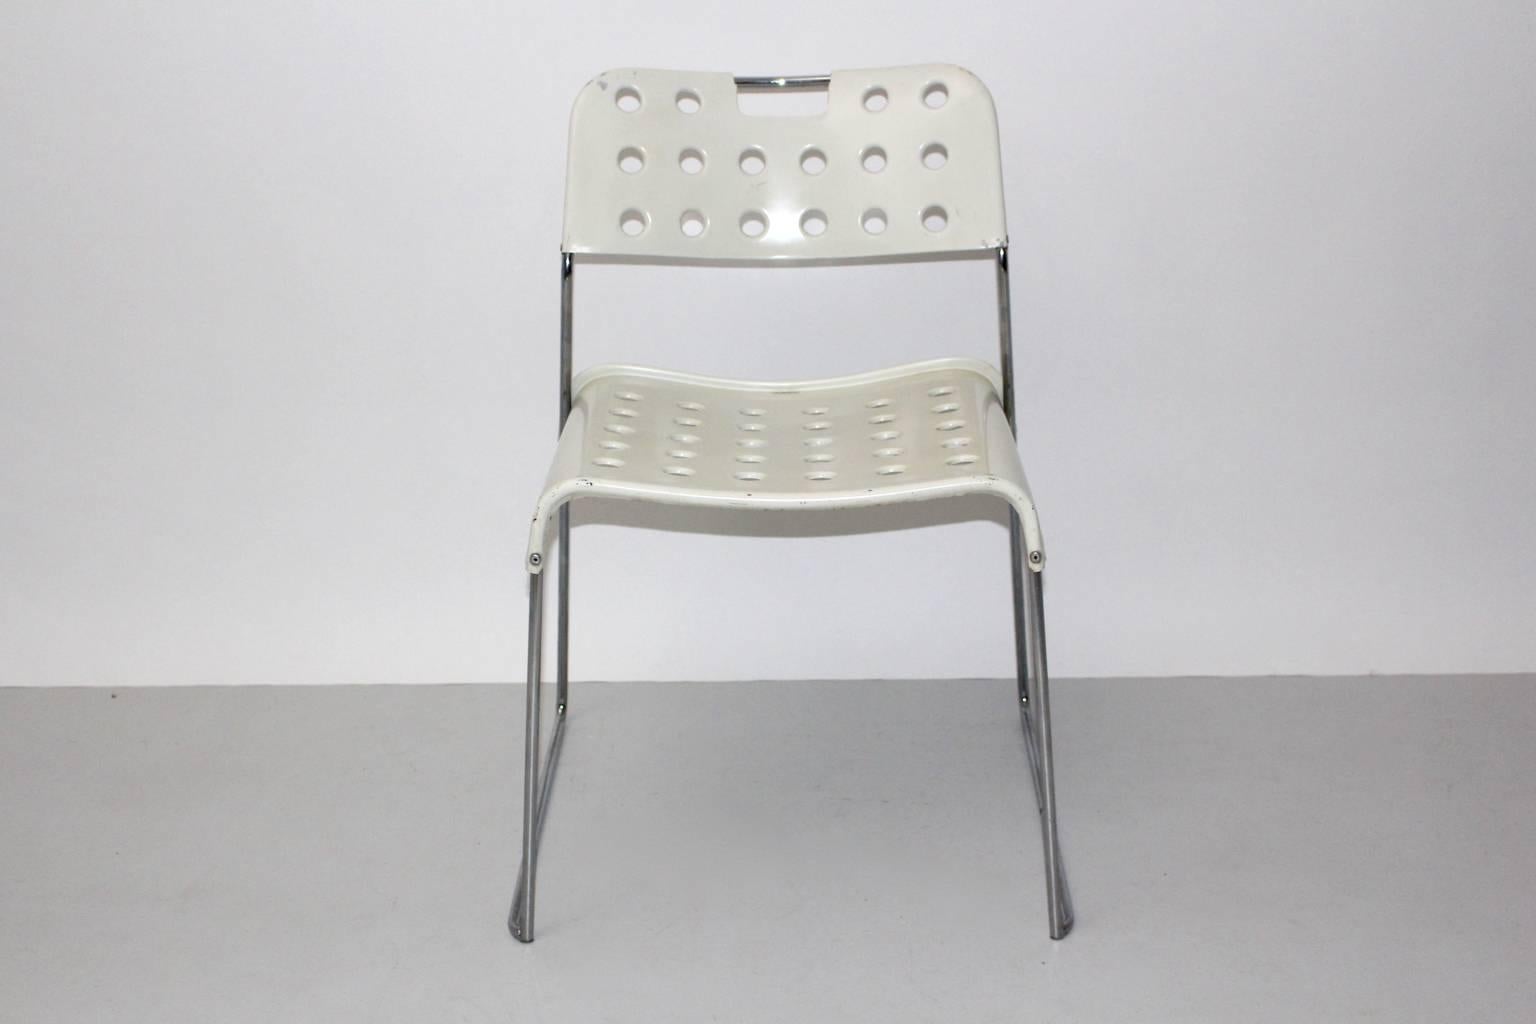 Space Age vintage white chair or side chair model Omstak designed by Rodney Kinsman 1971 and produced by Bieffeplast, Caselle di Selvazzano.
The extraordinary chair shows perforated seat and back from metal covered with plastic.
Very good condition